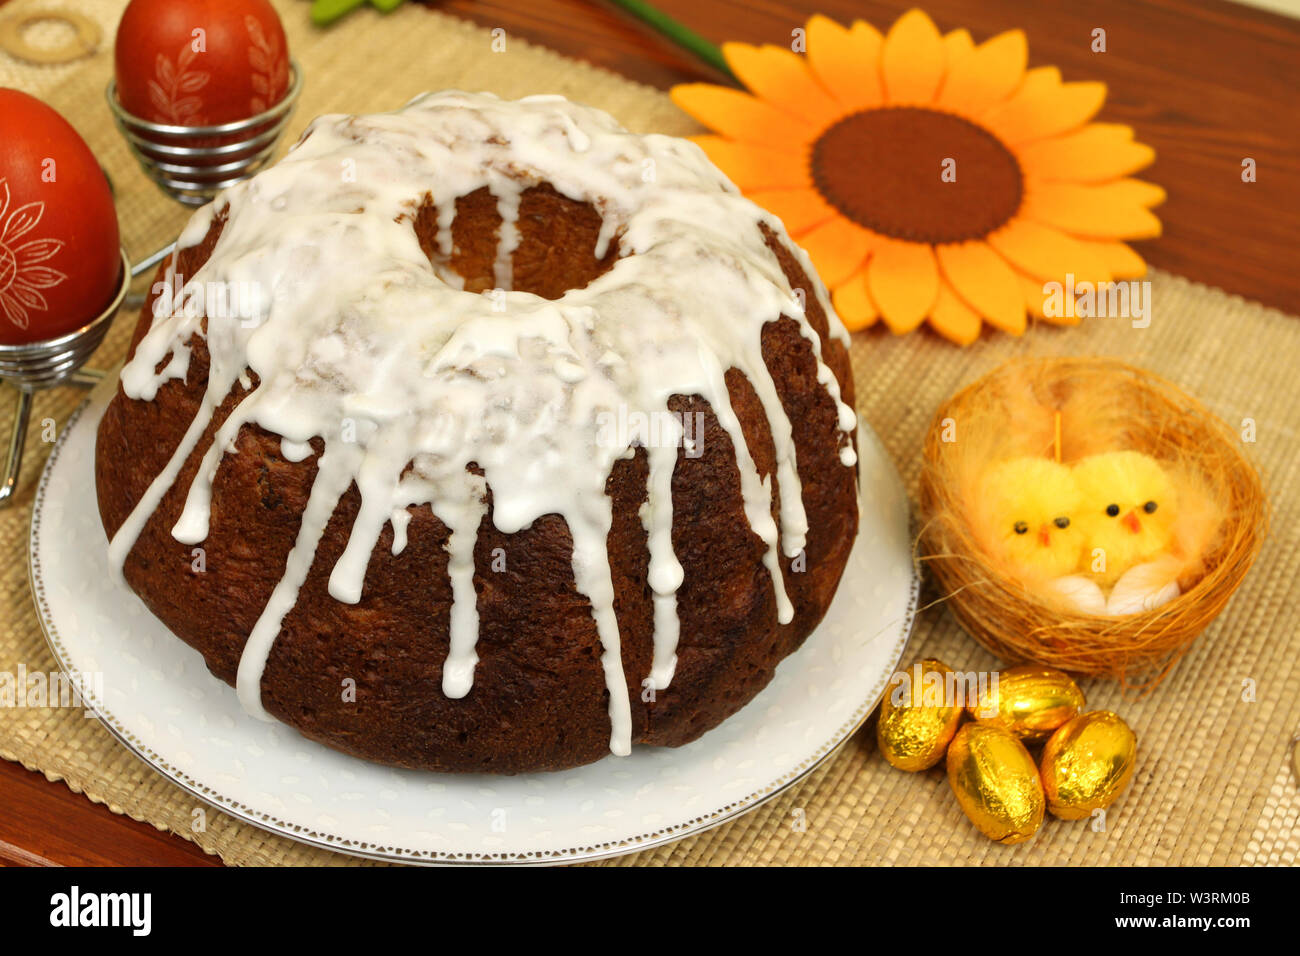 Traditional Easter yeast cake with decoration Stock Photo